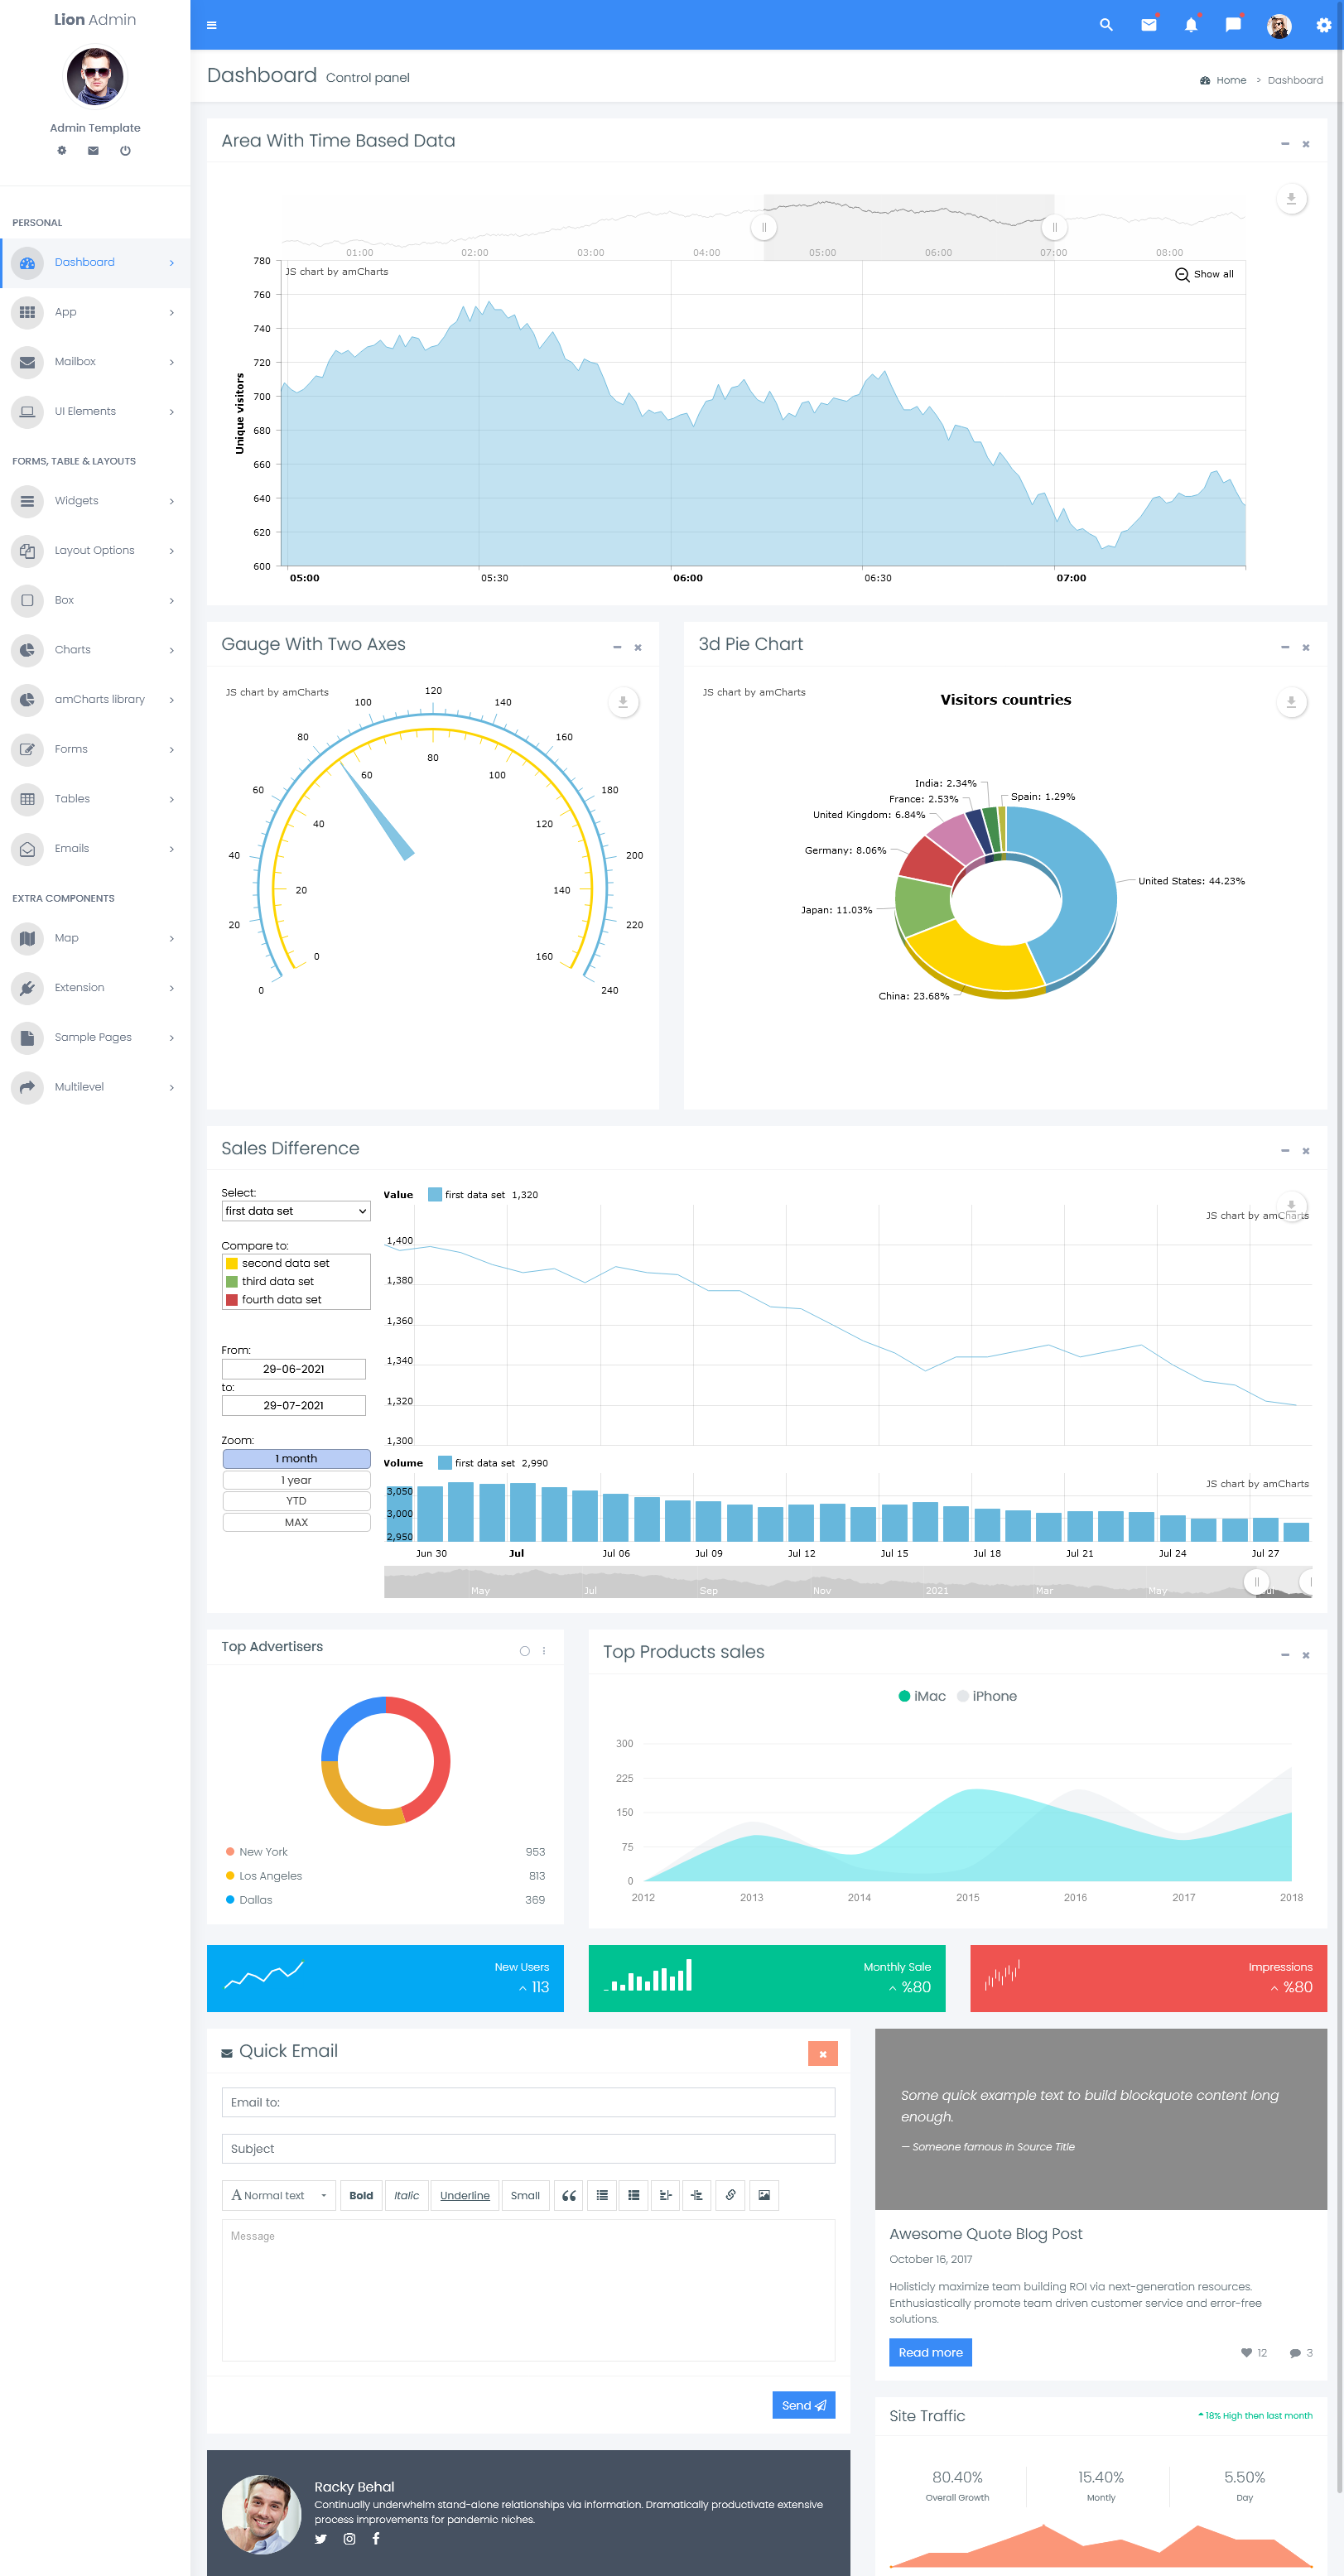 Lion - Responsive Bootstrap 4 Admin Dashboard Template and WebApp